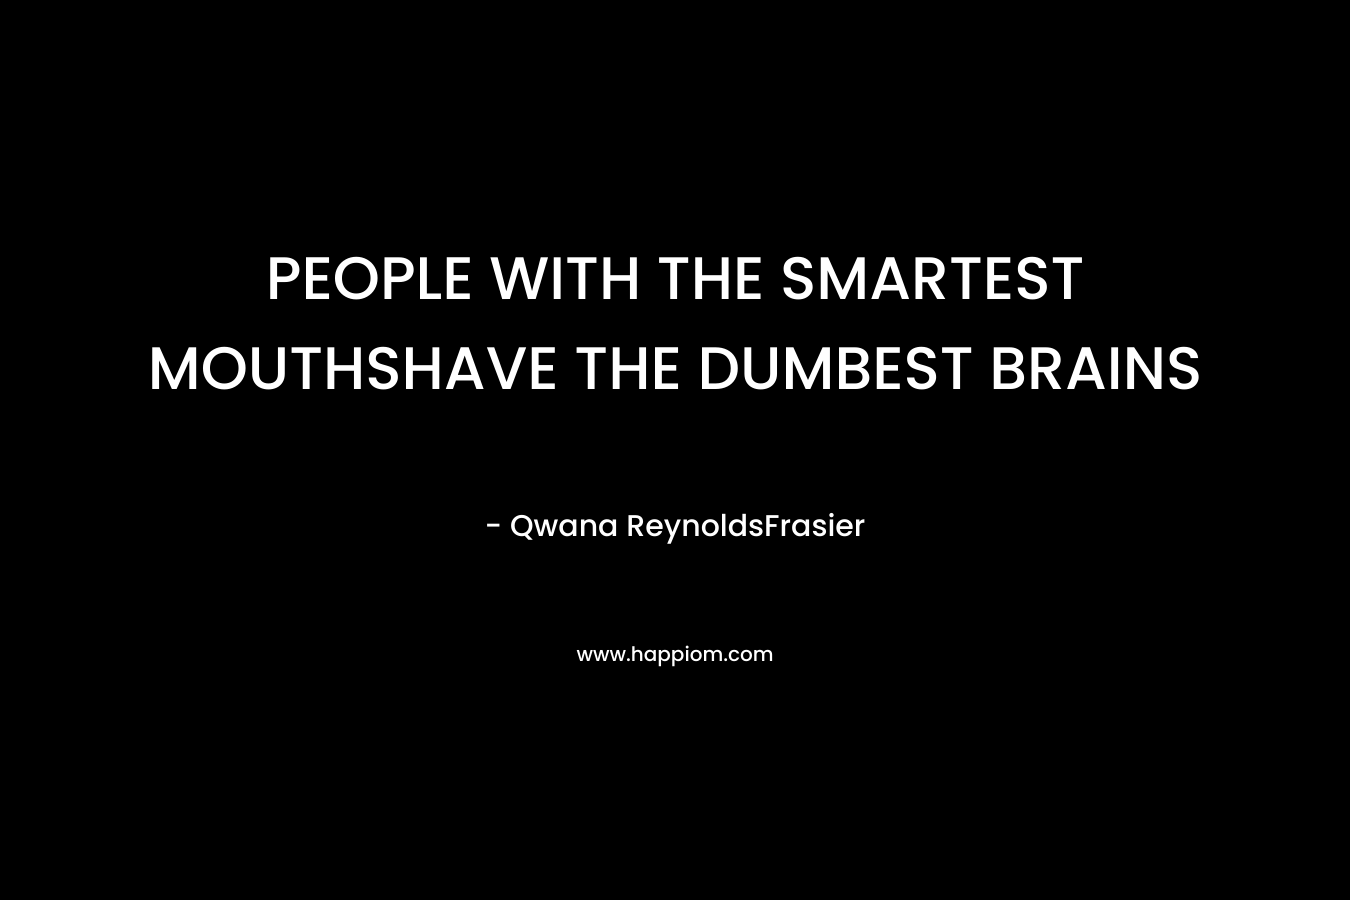 PEOPLE WITH THE SMARTEST MOUTHSHAVE THE DUMBEST BRAINS – Qwana ReynoldsFrasier